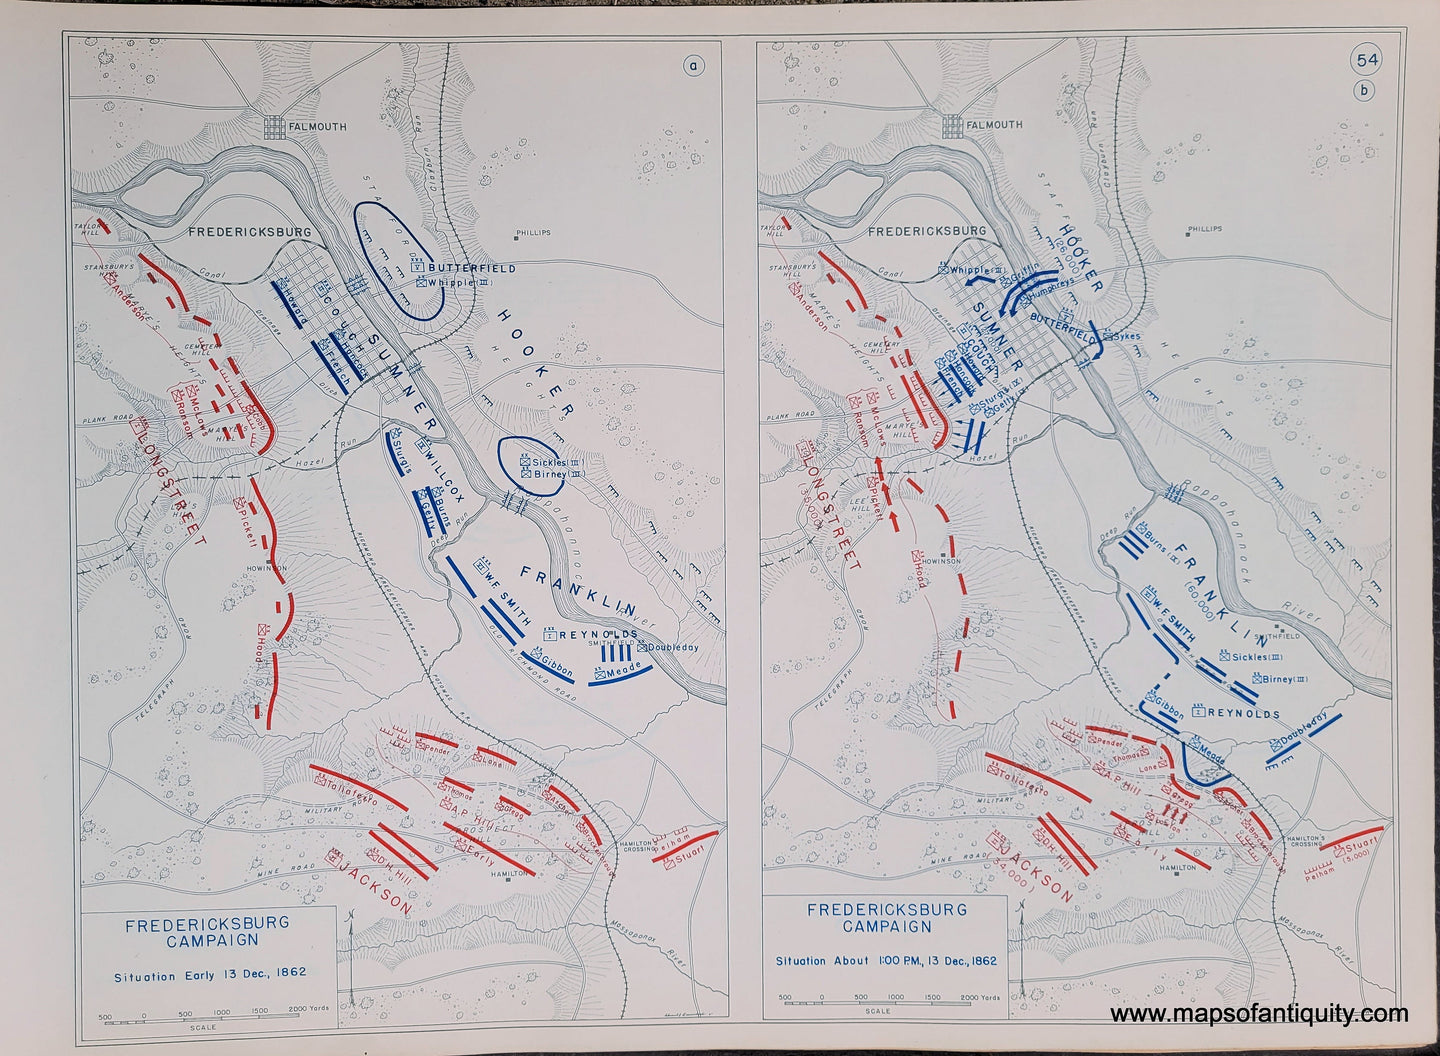 Genuine-Antique-Map-Fredericksburg-Campaign-Situation-Early-13-Dec--1862-and-Situation-About-1-00-PM-13-Dec--1862-1948-Matthew-Forney-Steele-Dept-of-Military-Art-and-Engineering-US-Military-Academy-West-Point-Maps-Of-Antiquity